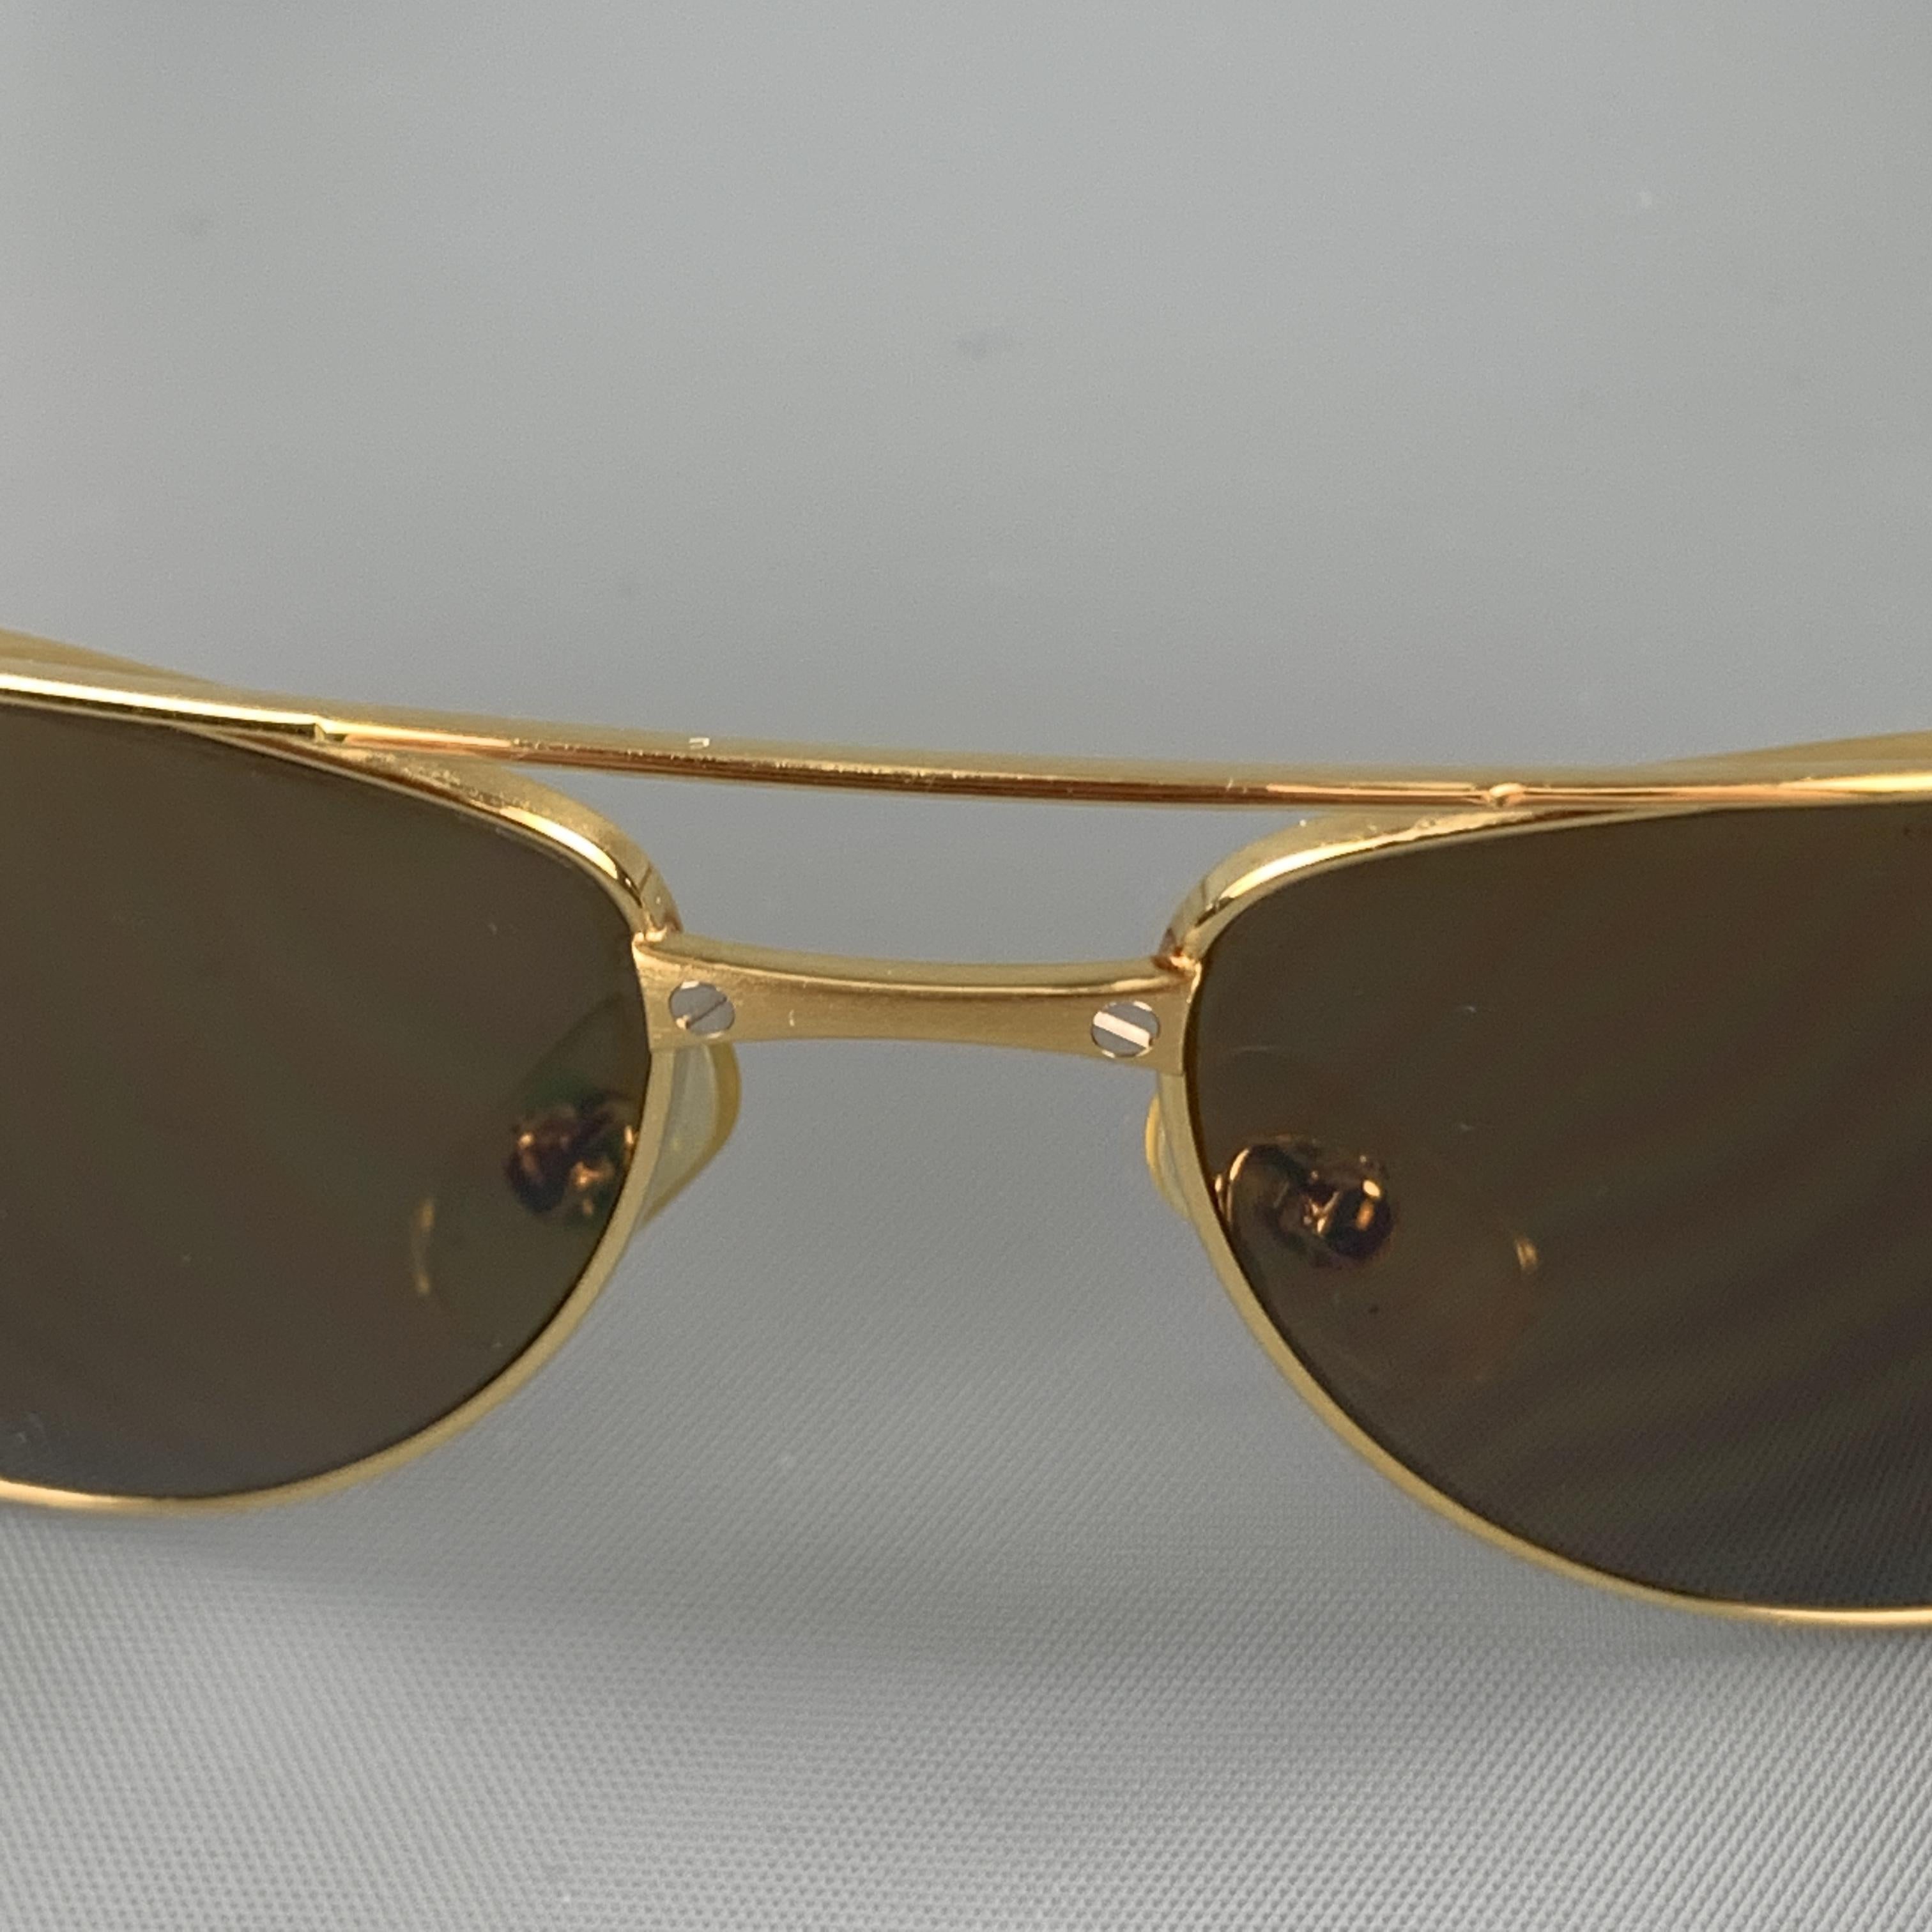 CARTIER Santos-Dumont aviator sunglasses come in brushed gold tone metal with brown lenses and screw details throughout. Made in France.

Very Good Pre-Owned Condition.
Marked: 3812536

Measurements:

Length: 14.5 cm.
Height:  4.5 cm.